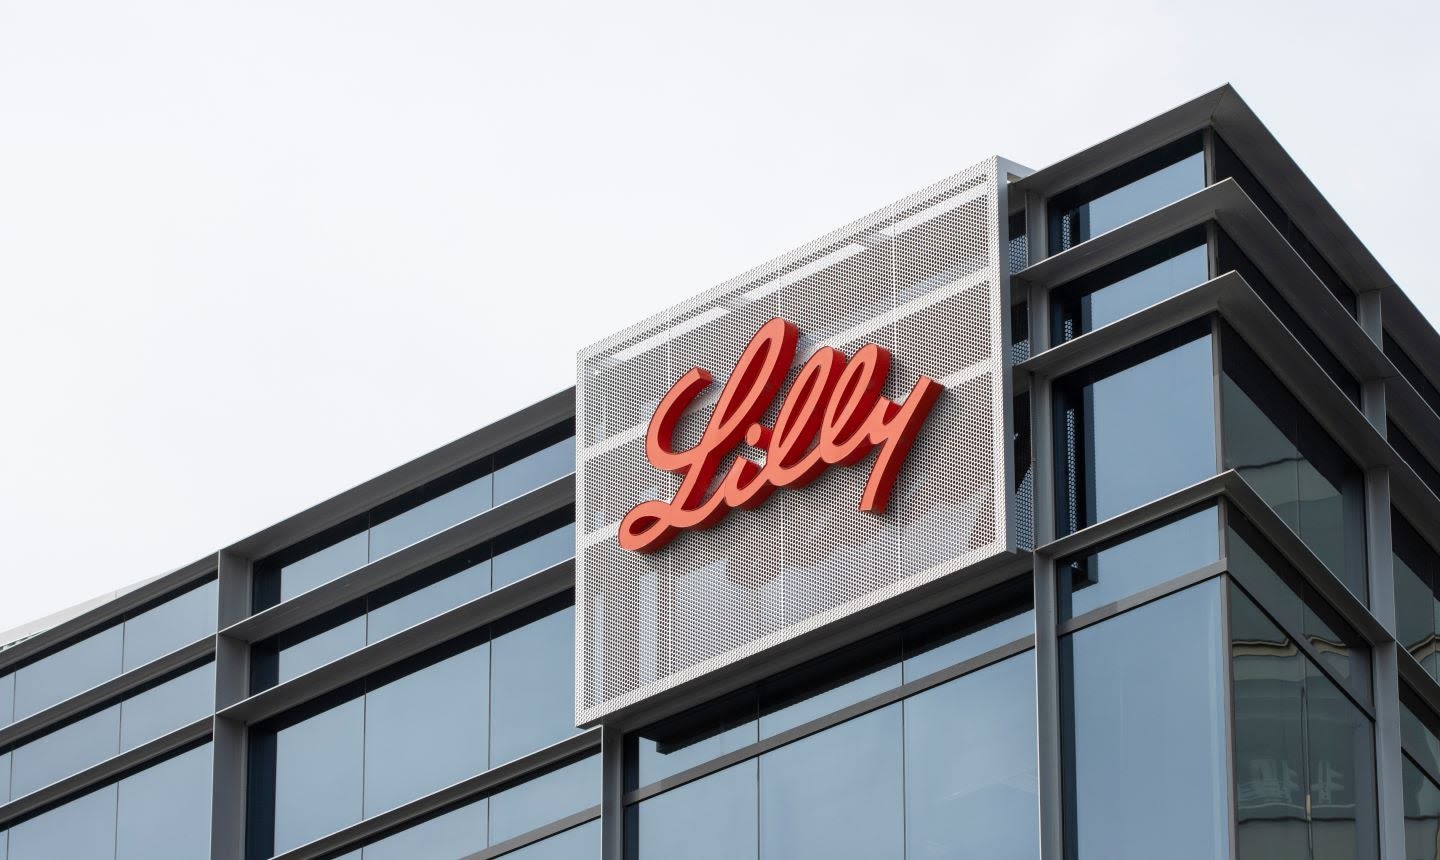 Eli Lilly’s efsitora alfa shows promise in Phase III T2D trials